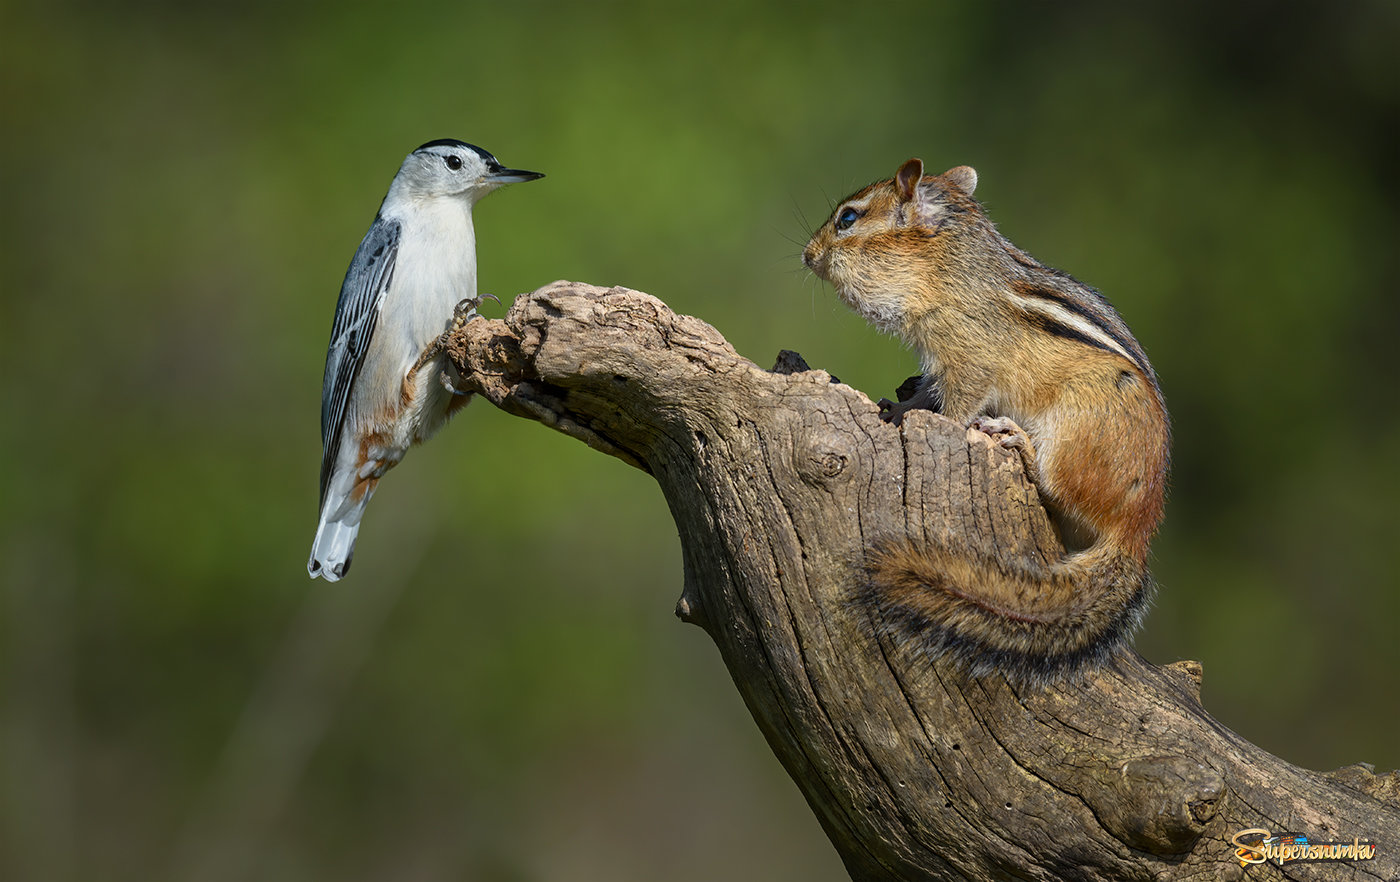 White-breasted Nuthatch vs. Chipmunk